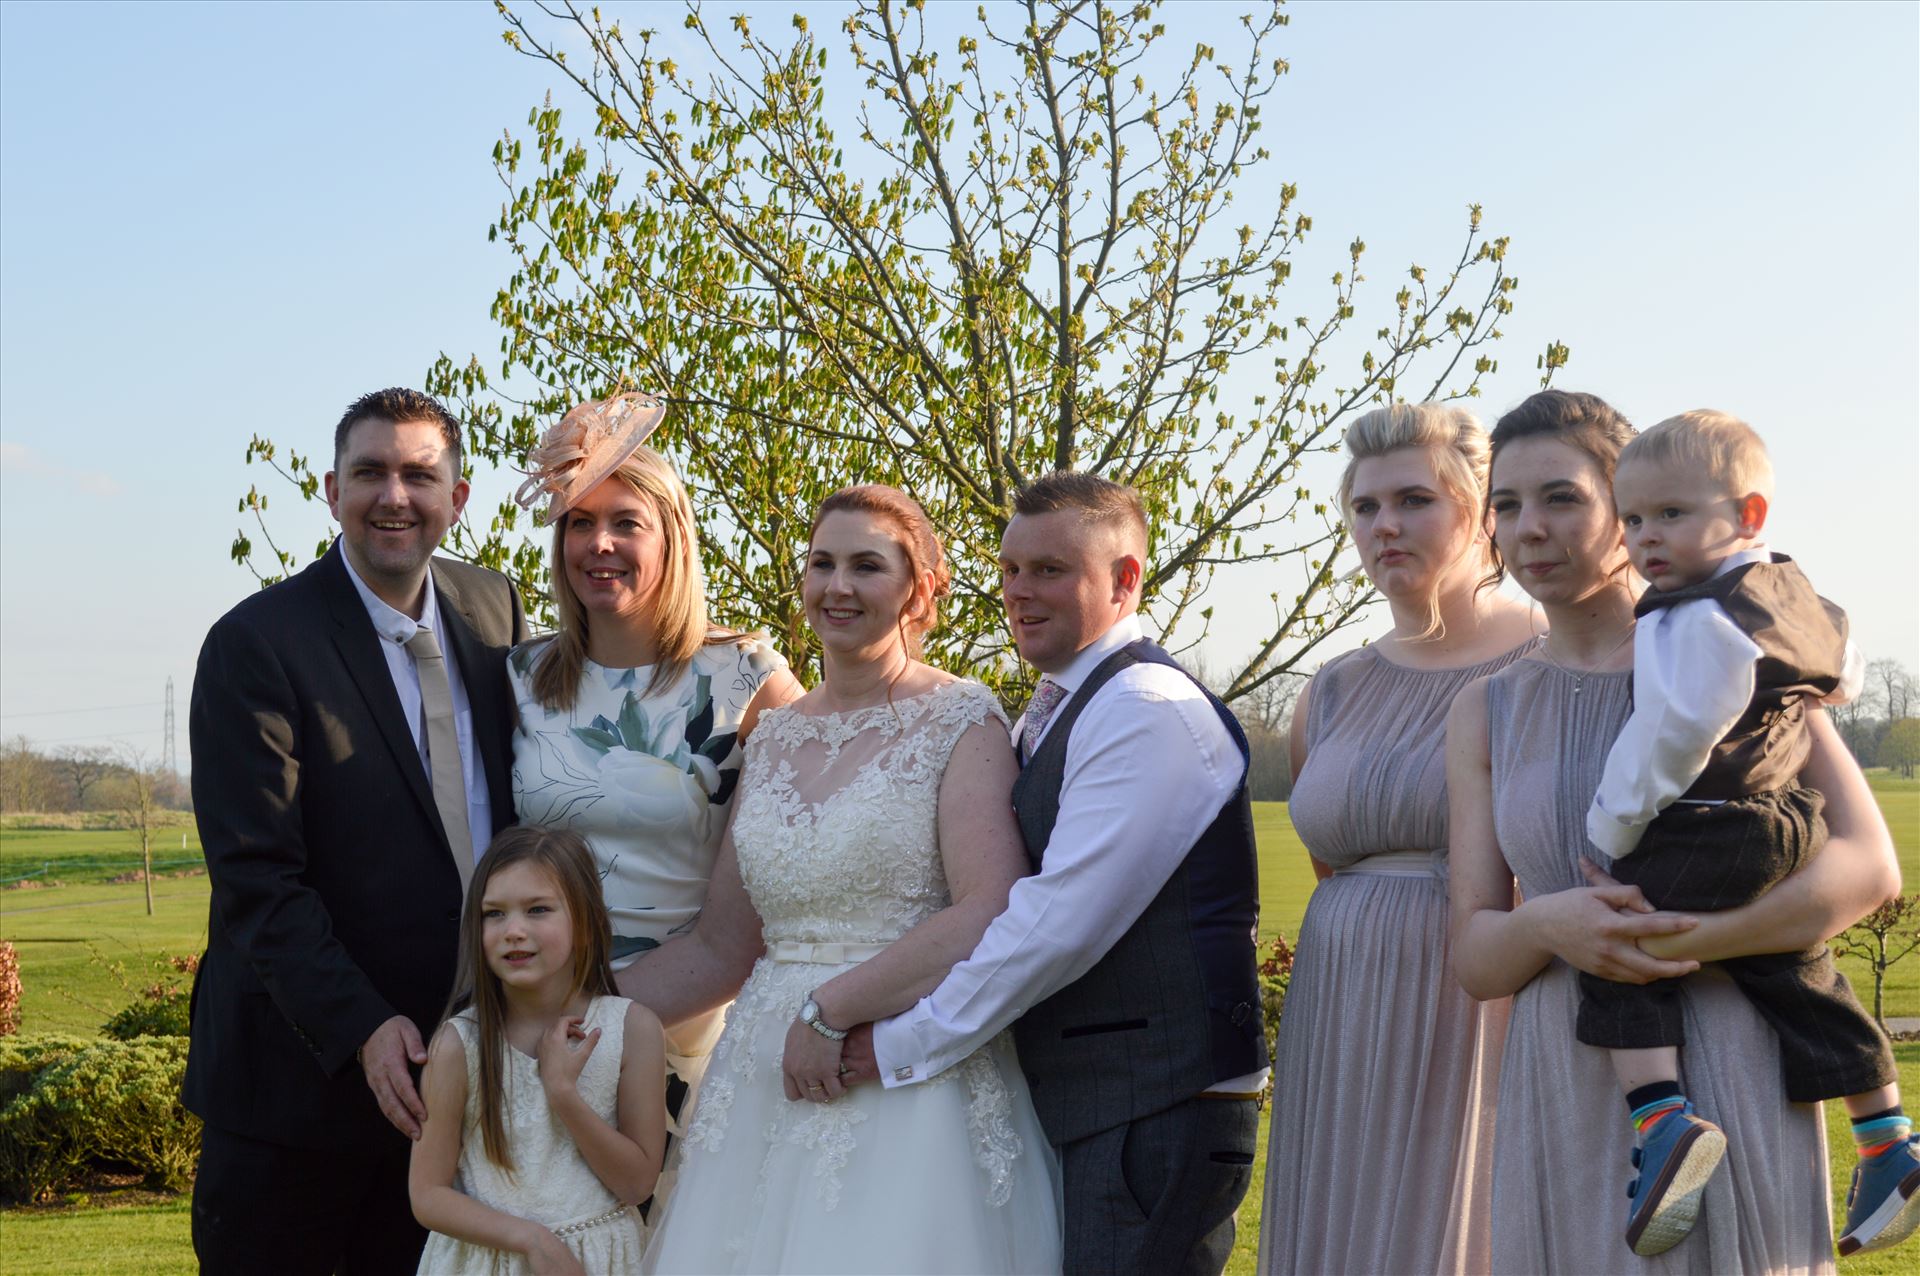 Nikky and Neils wedding z-12.jpg  by AJ Stoves Photography